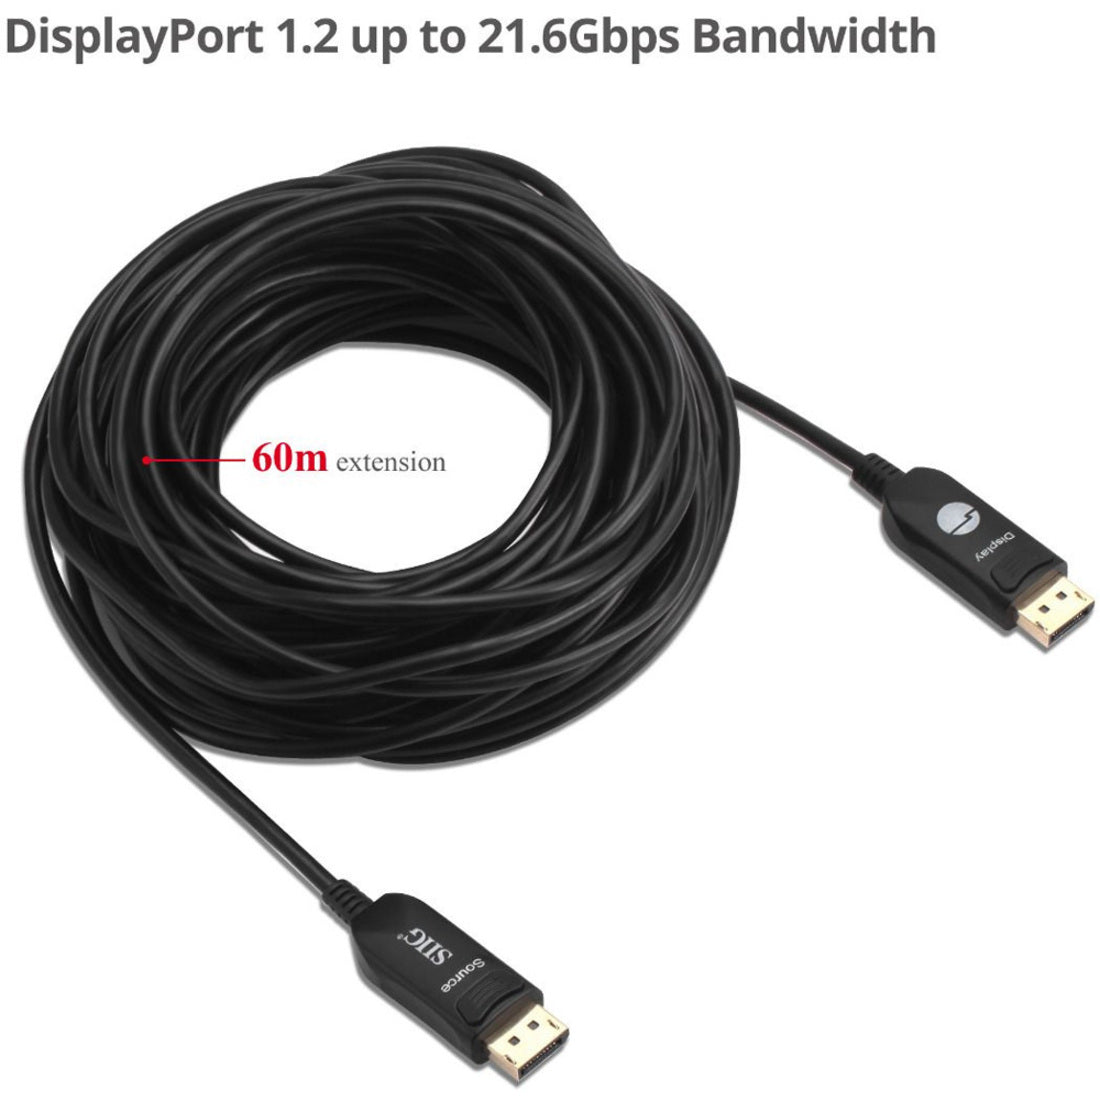 SIIG CB-DP2511-S1 4K DisplayPort 1.2 AOC Cable - 60M, Plug & Play, 21.6 Gbit/s Data Transfer Rate, 196.85 ft Cable Length